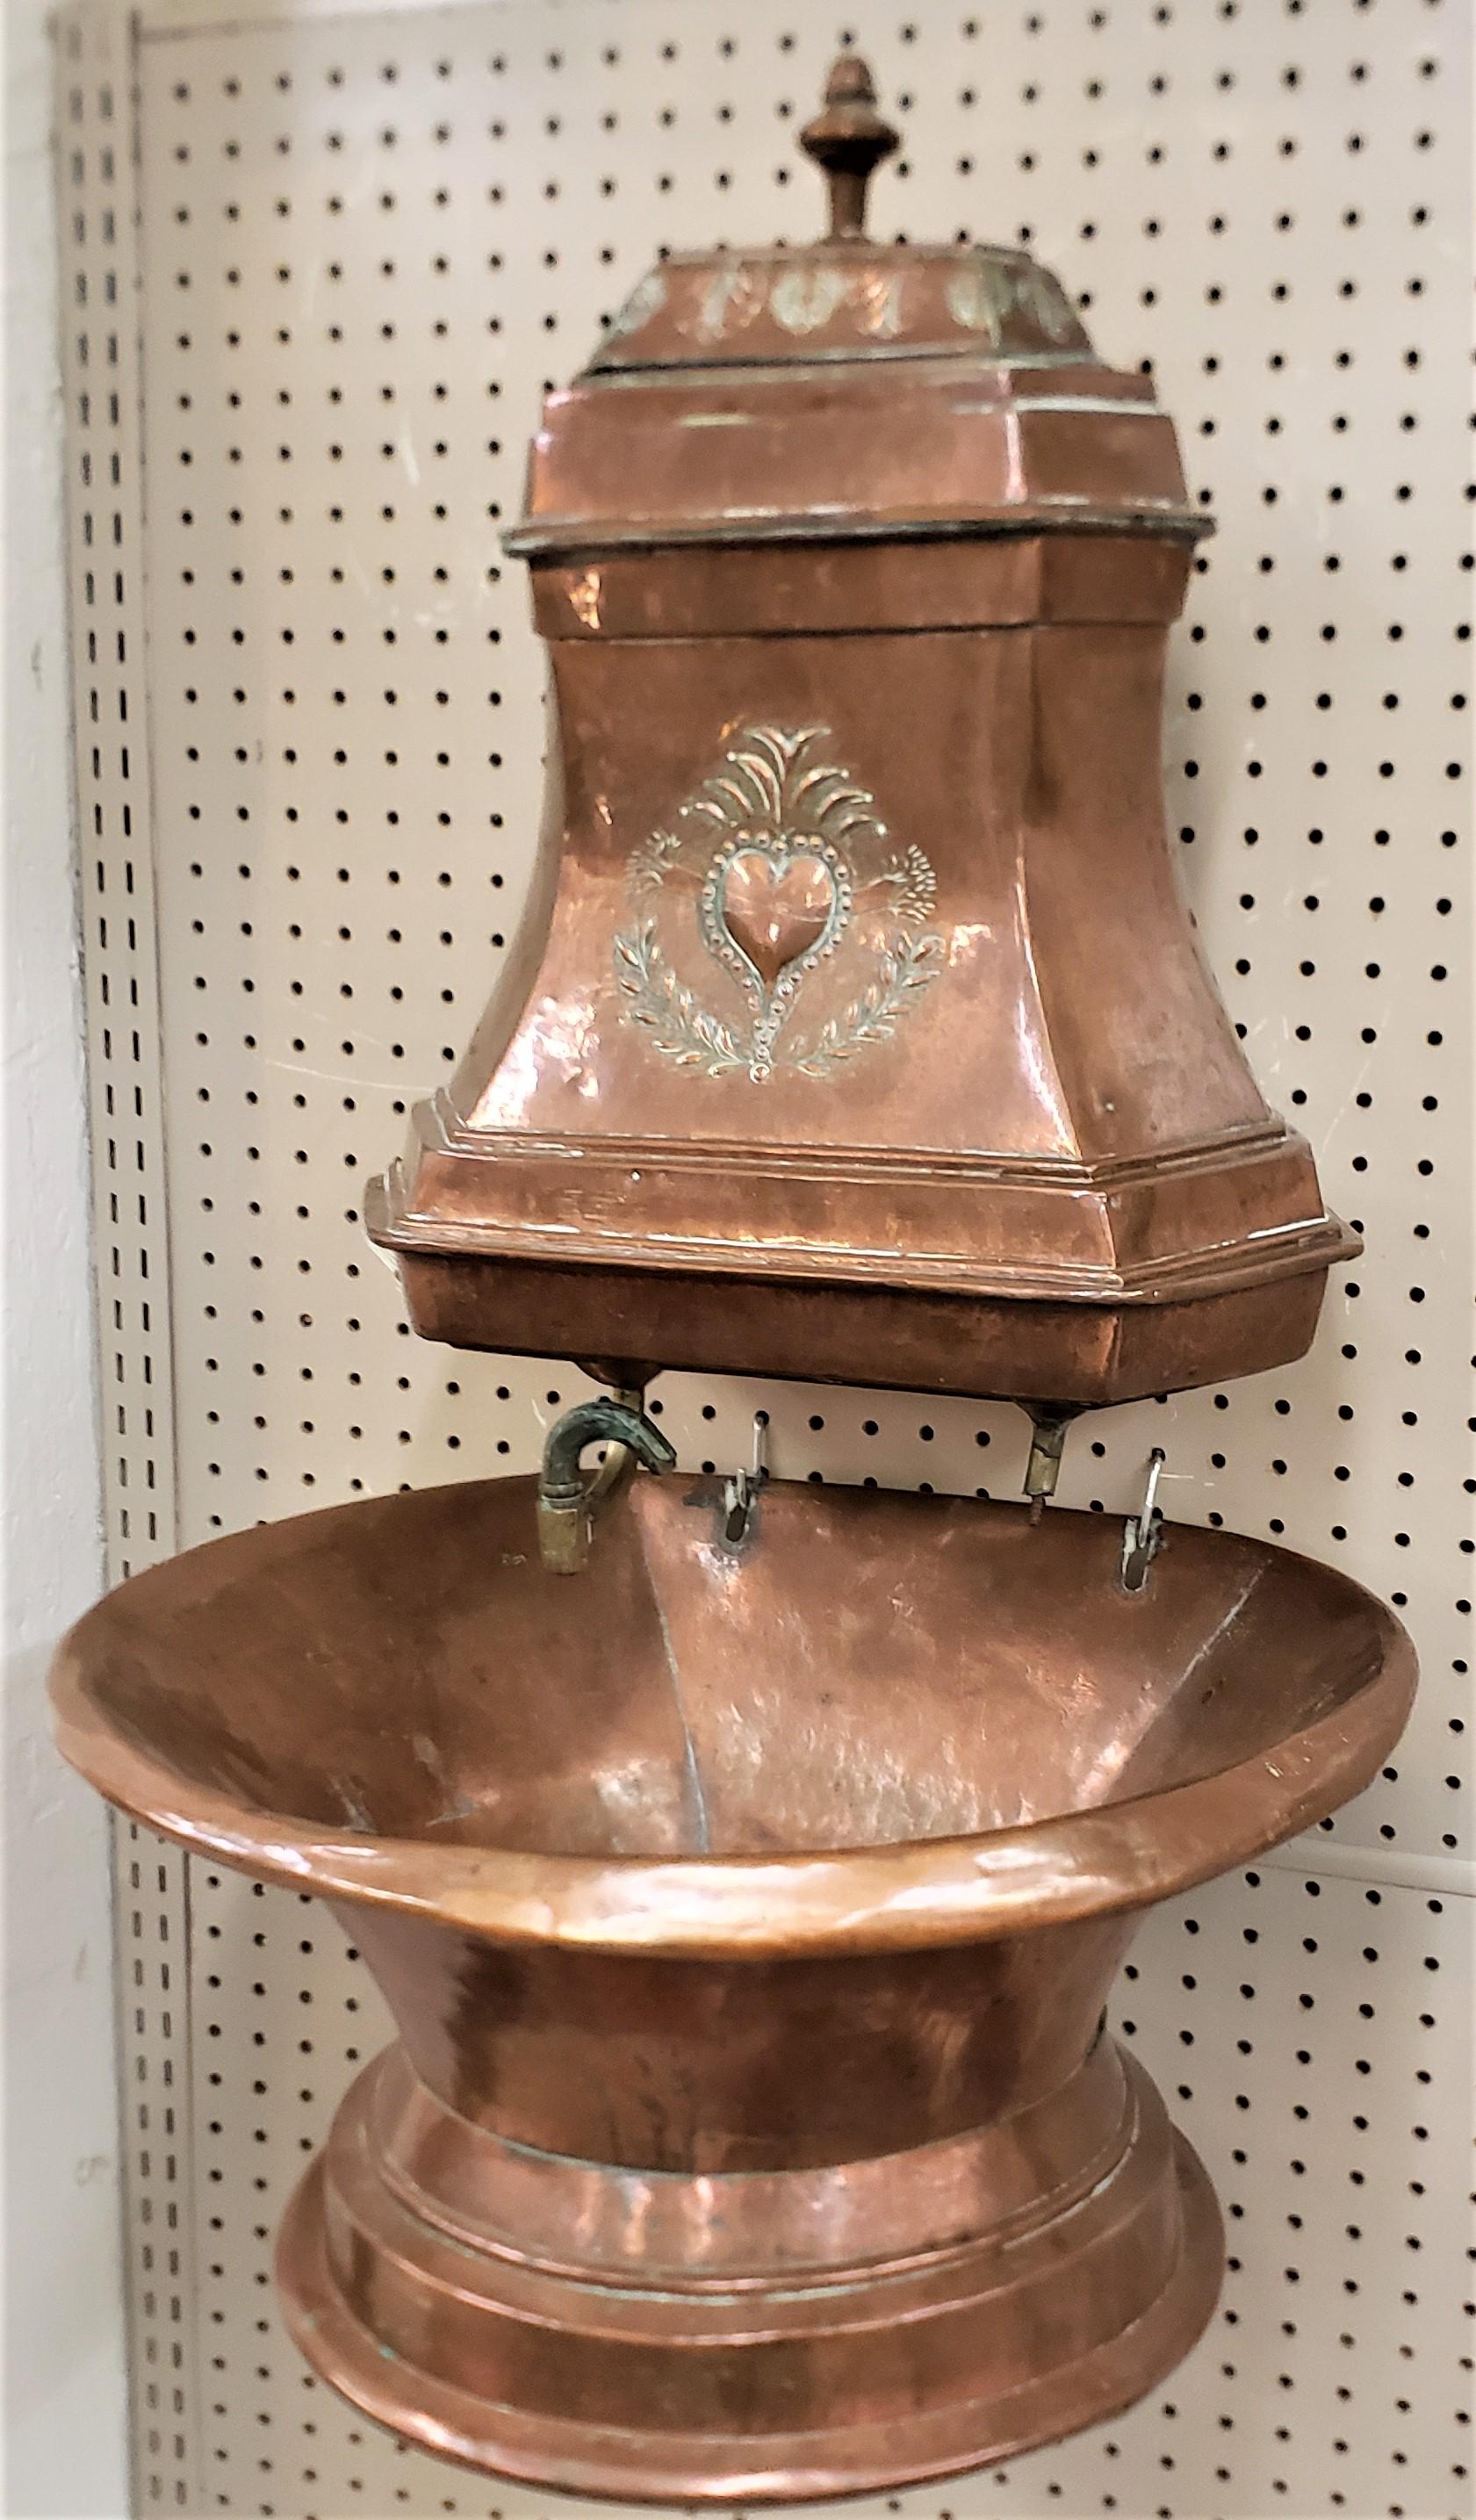 French Provincial Antique French Copper Converted Cistern & Sink Planter Box or Garden Ornament For Sale